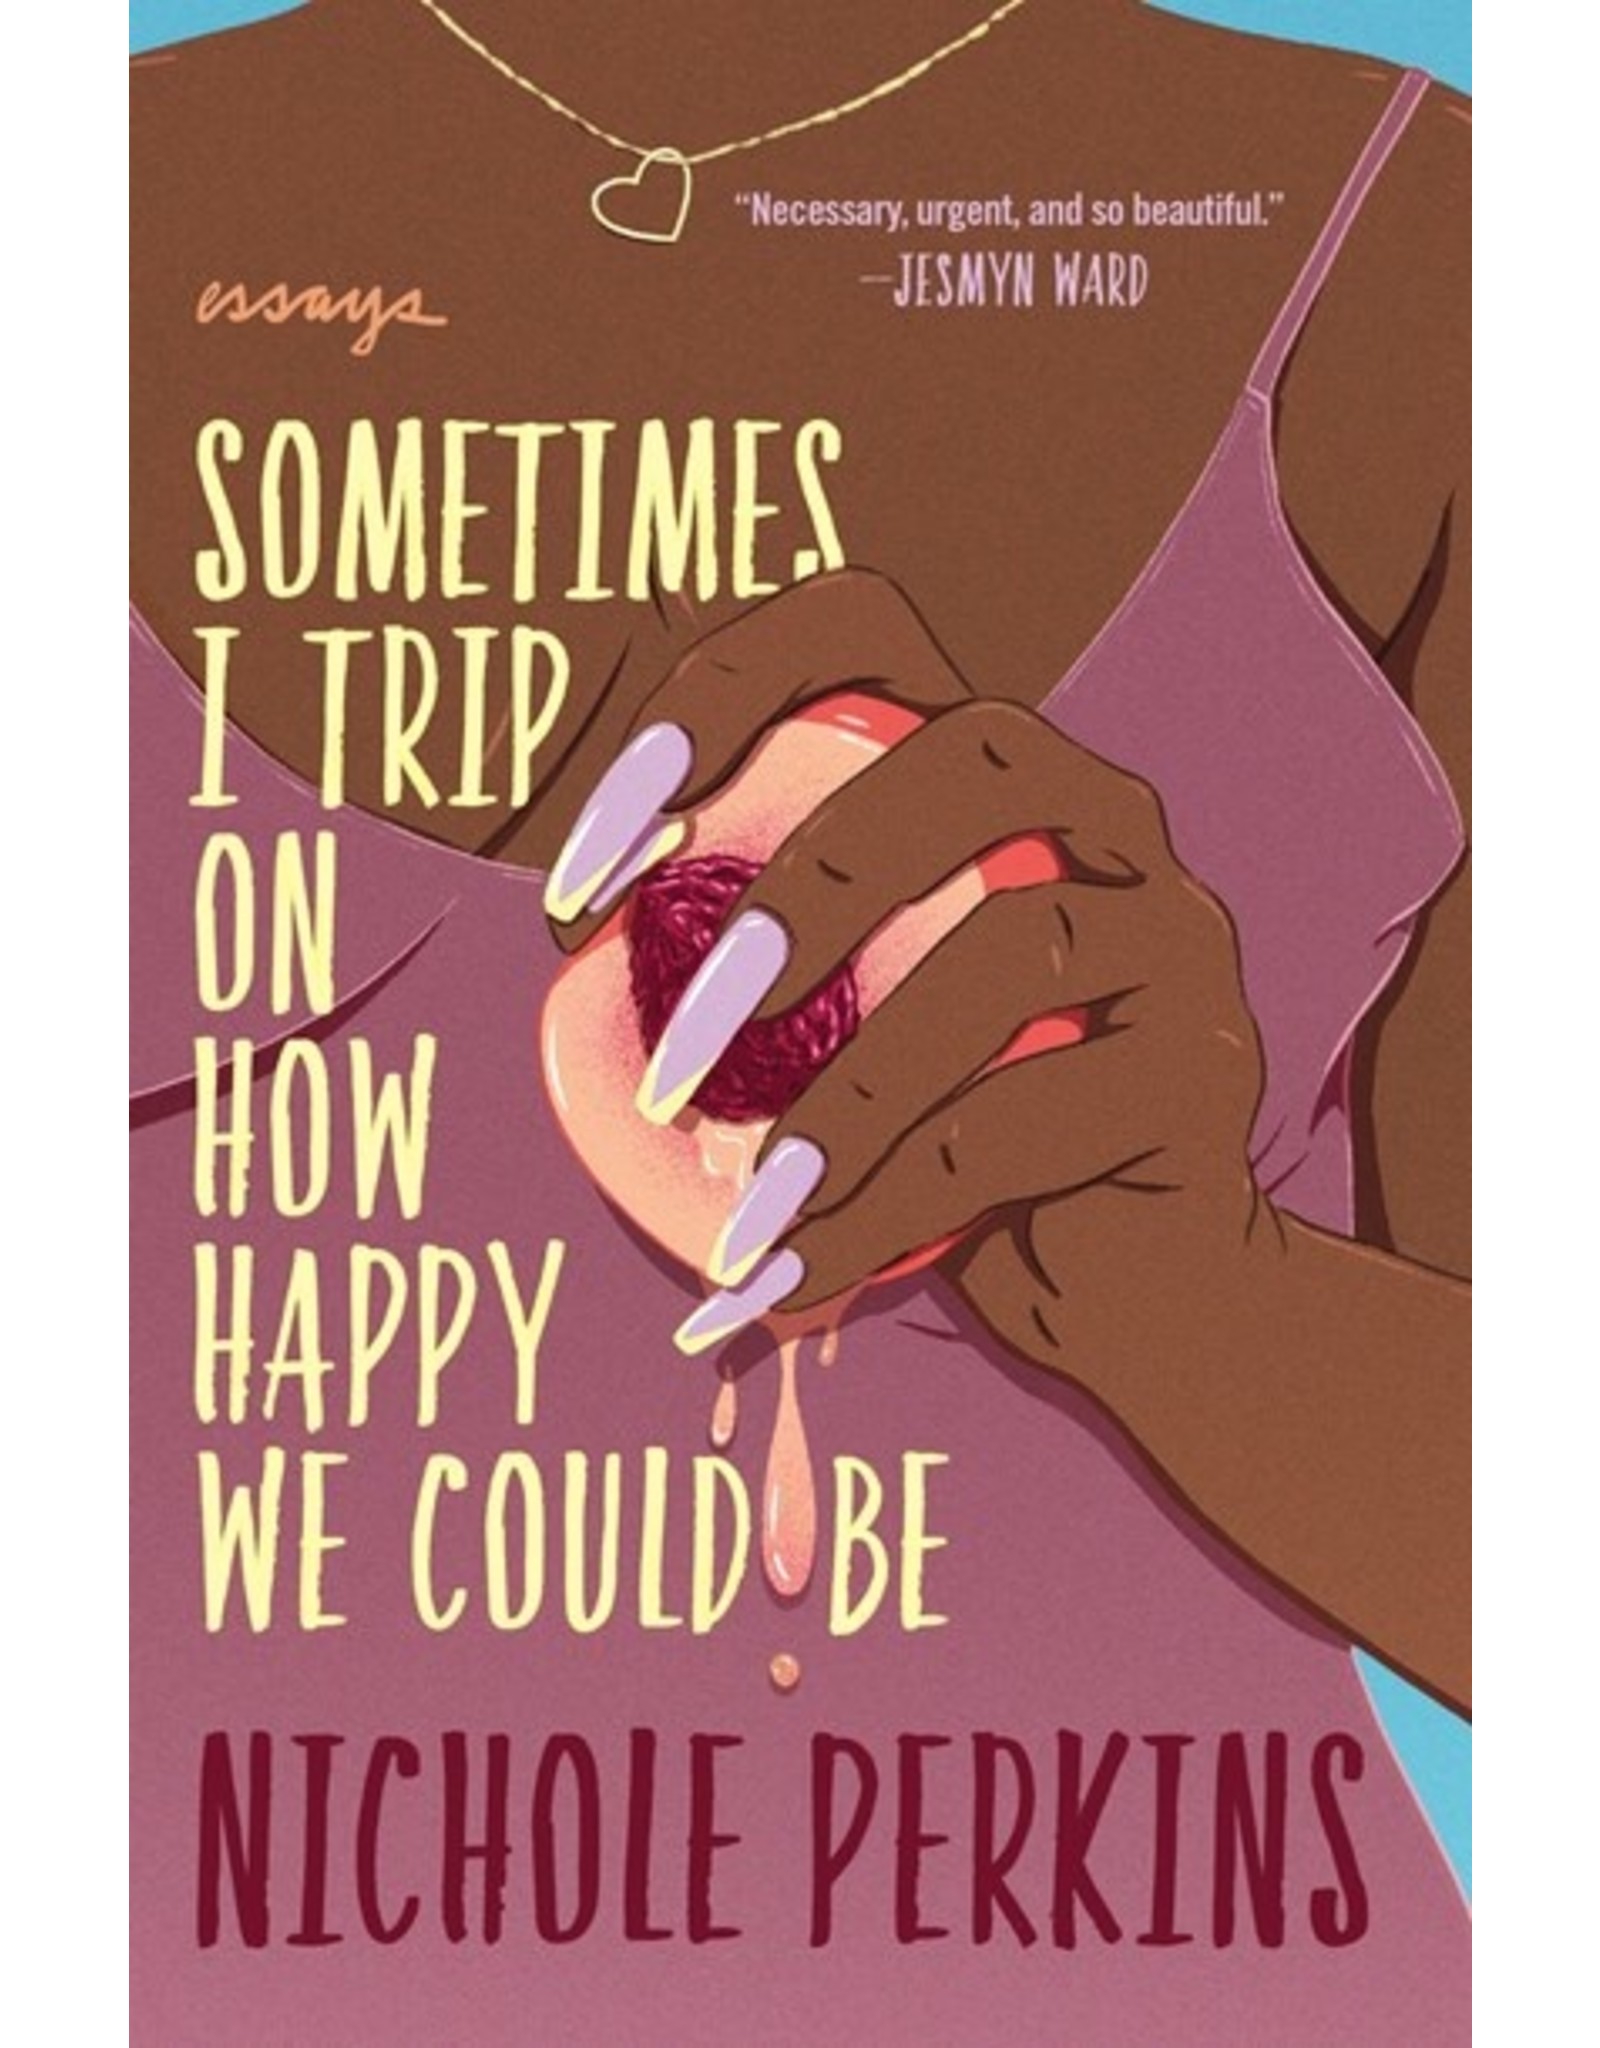 Books Sometimes I Trip on How Happy I Can Be by Nicole Perkins